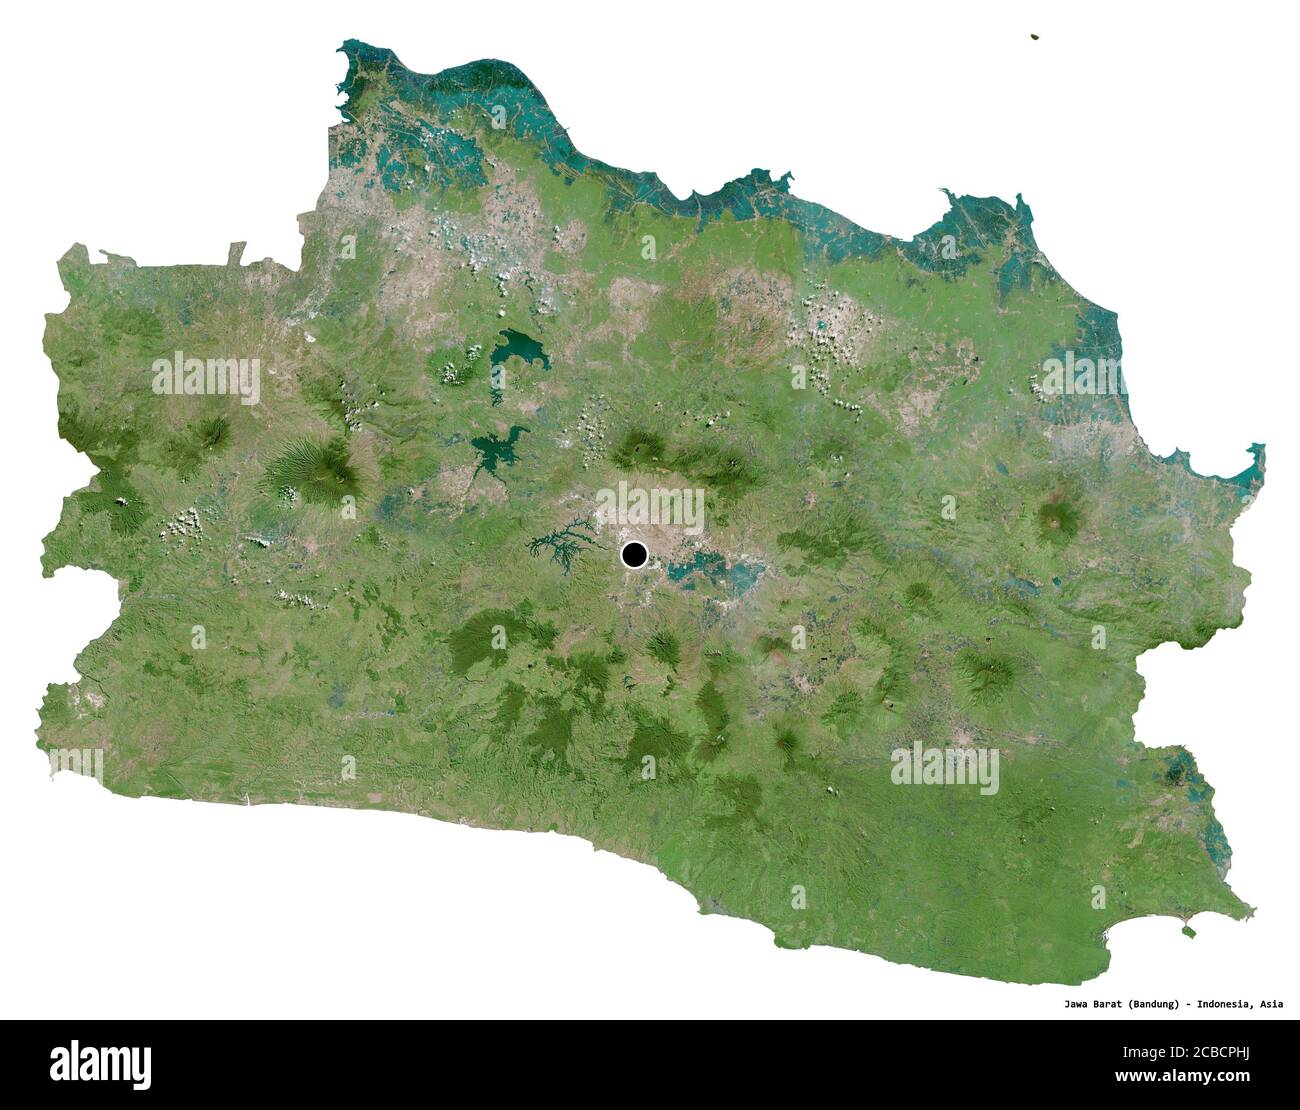 Shape of Jawa Barat, province of Indonesia, with its capital isolated on white background. Satellite imagery. 3D rendering Stock Photo